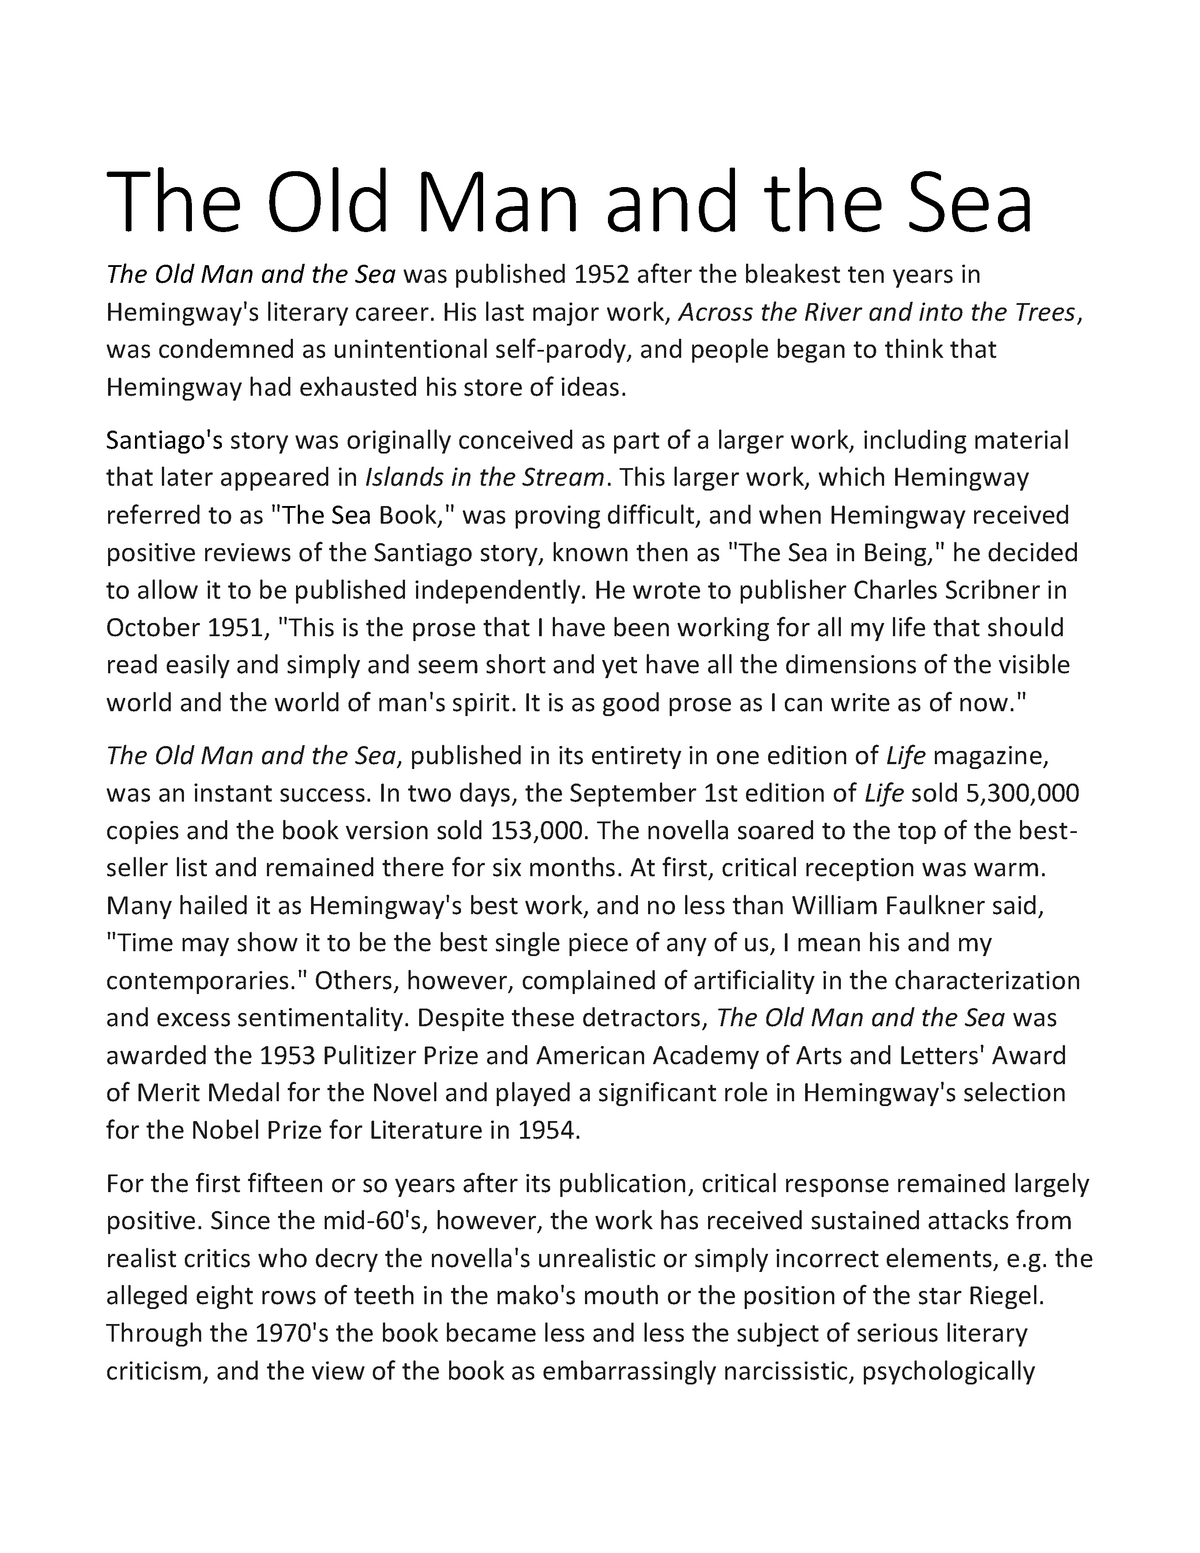 old man and the sea symbolism essay